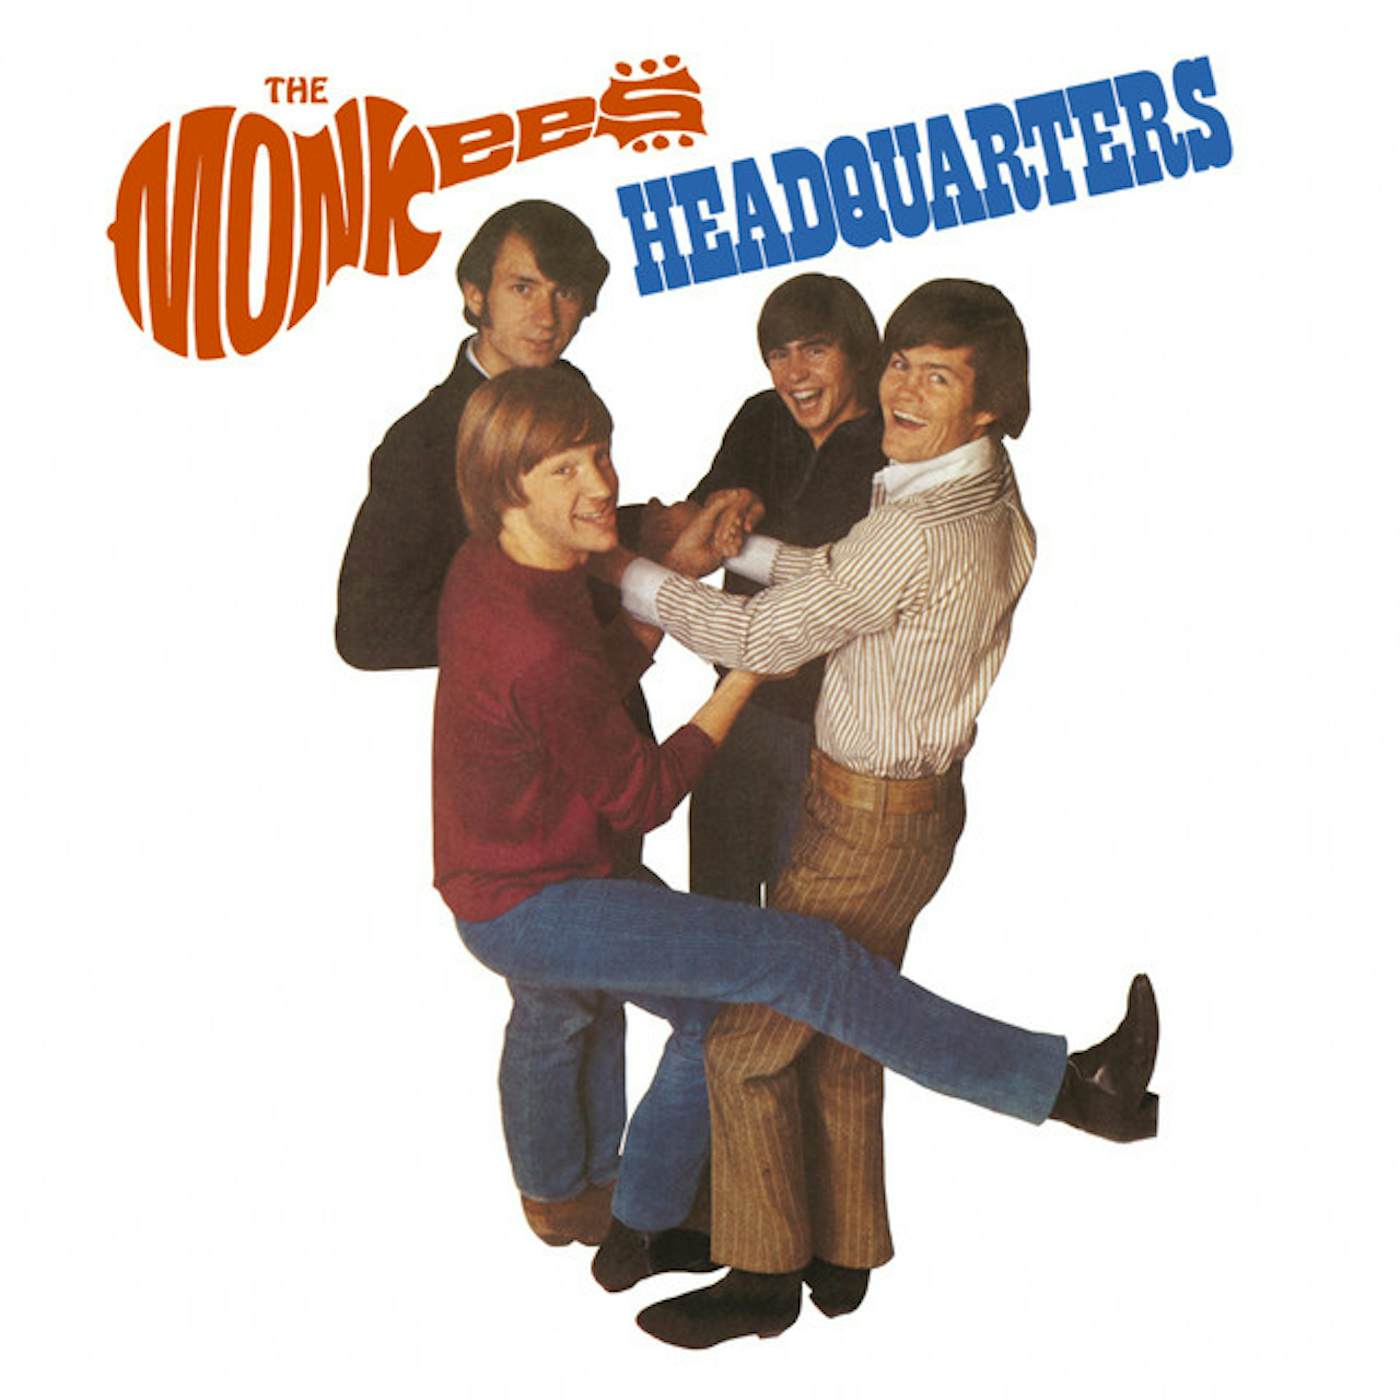 The Monkees Headquarters (Red) Vinyl Record